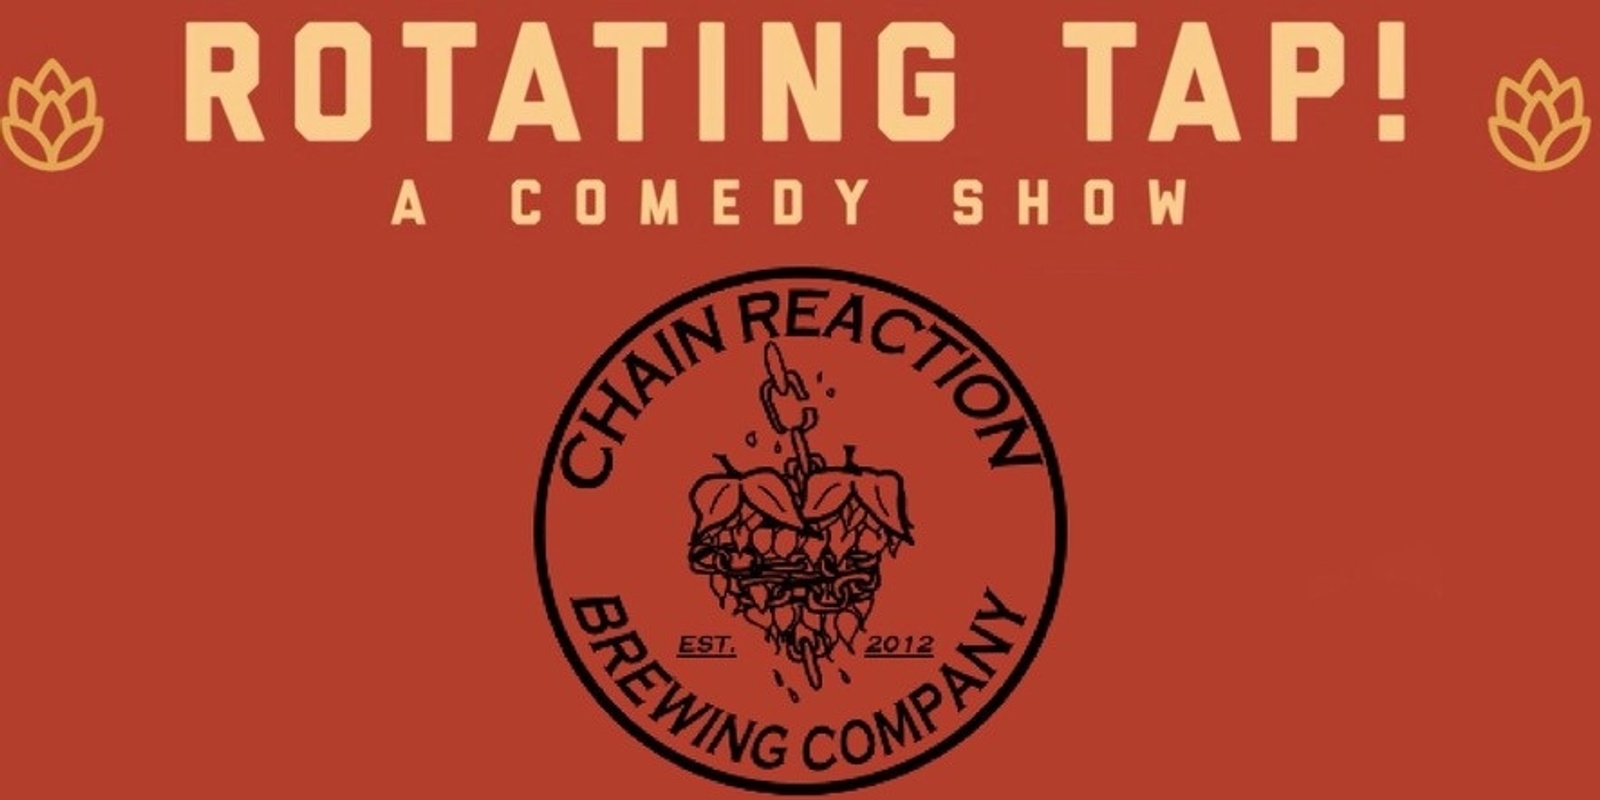 Banner image for Comedy Night at Chain Reaction Brewing Company - Presented by Rotating Tap Comedy